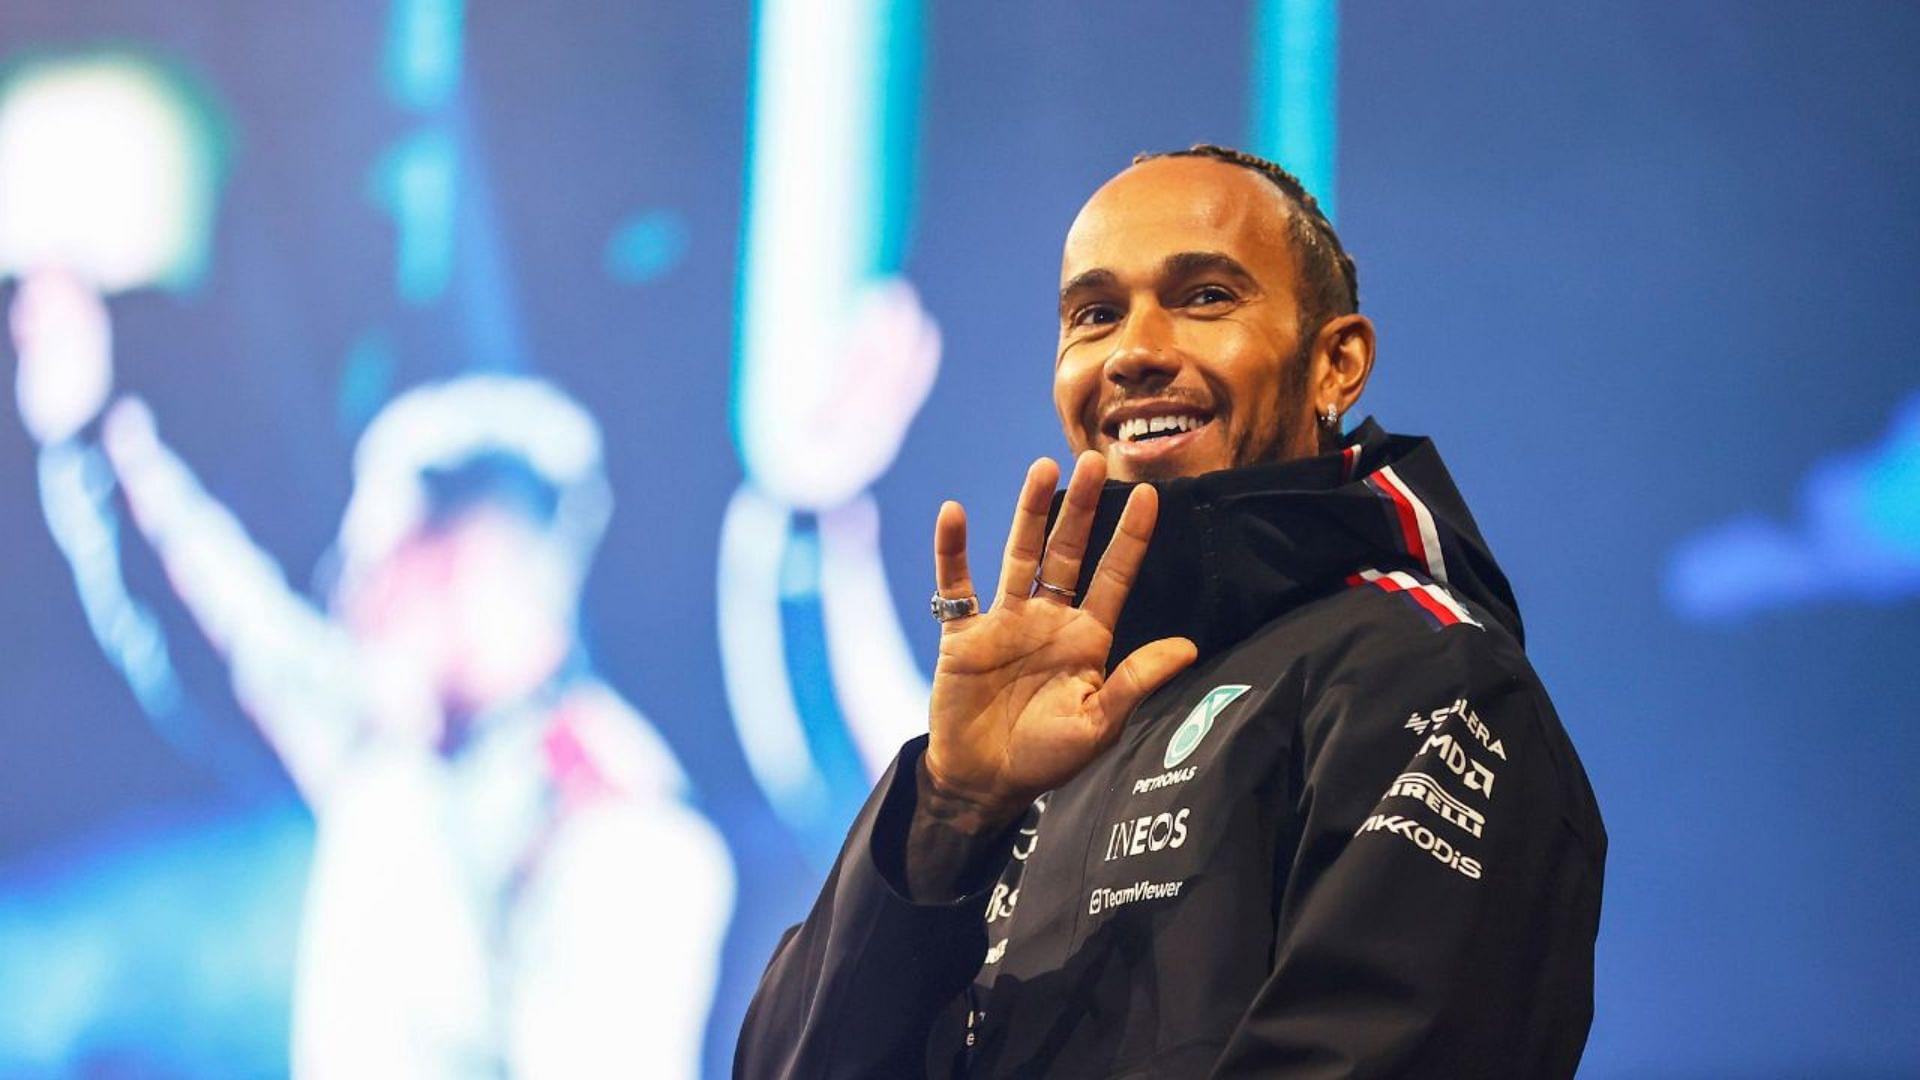 “My Mind Is Absolutely Blown!”: Thrilling Speeds in Ben Ainsley’s AC75 Leaves Lewis Hamilton Floored